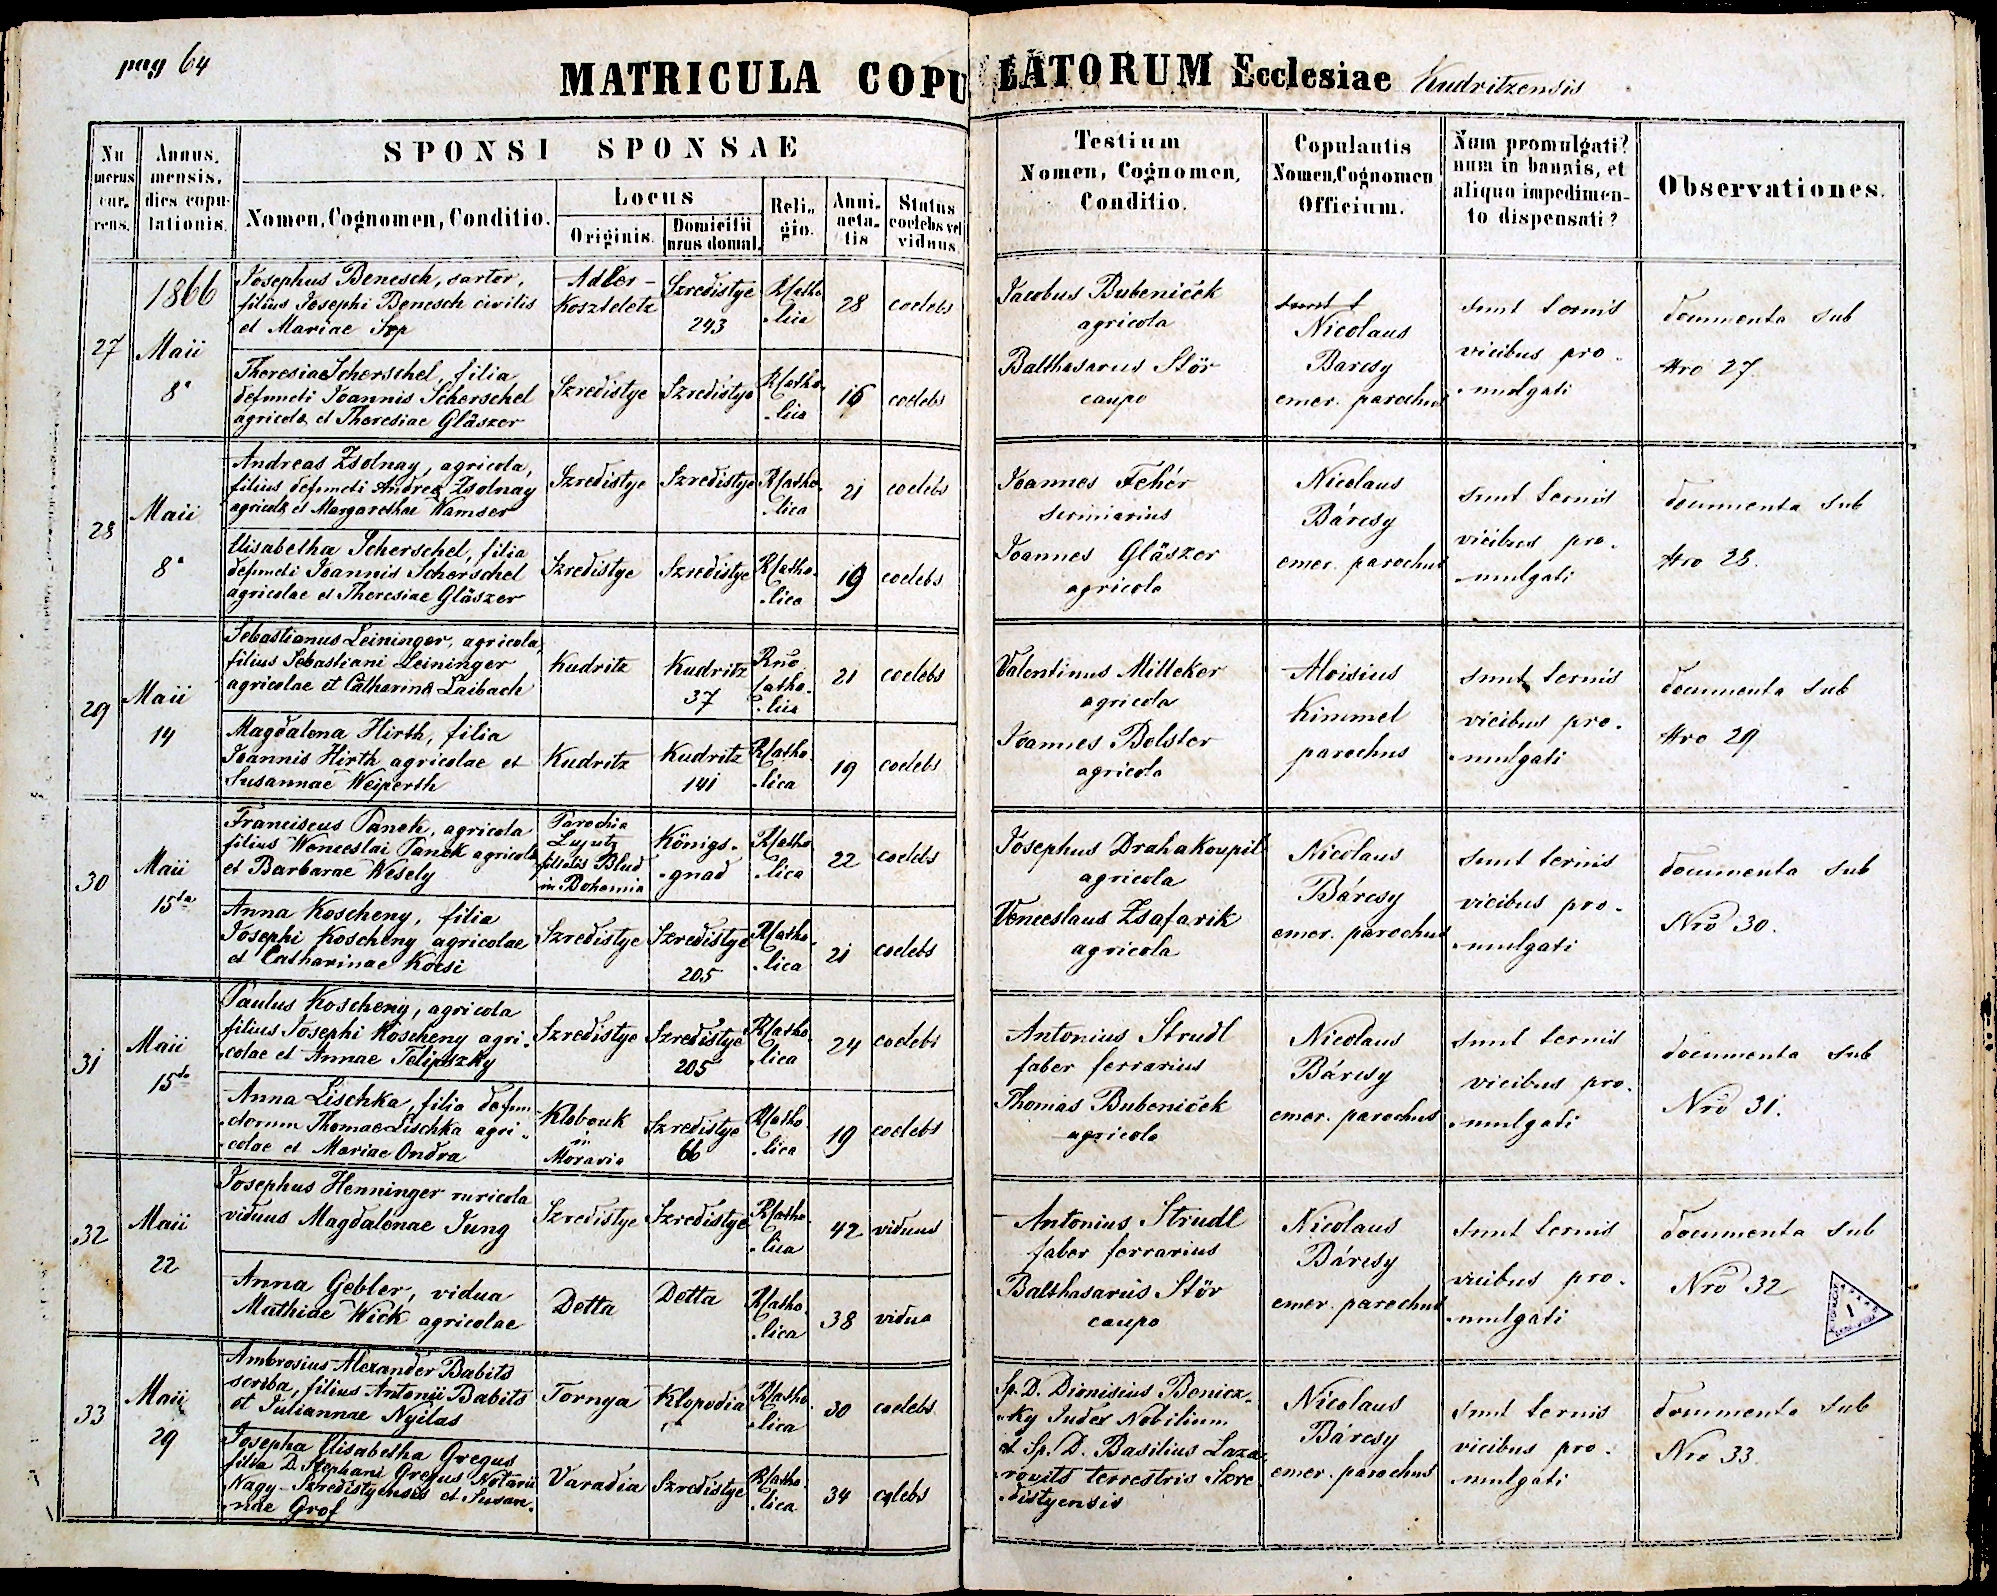 images/church_records/MARRIAGES/1871-1890M/064